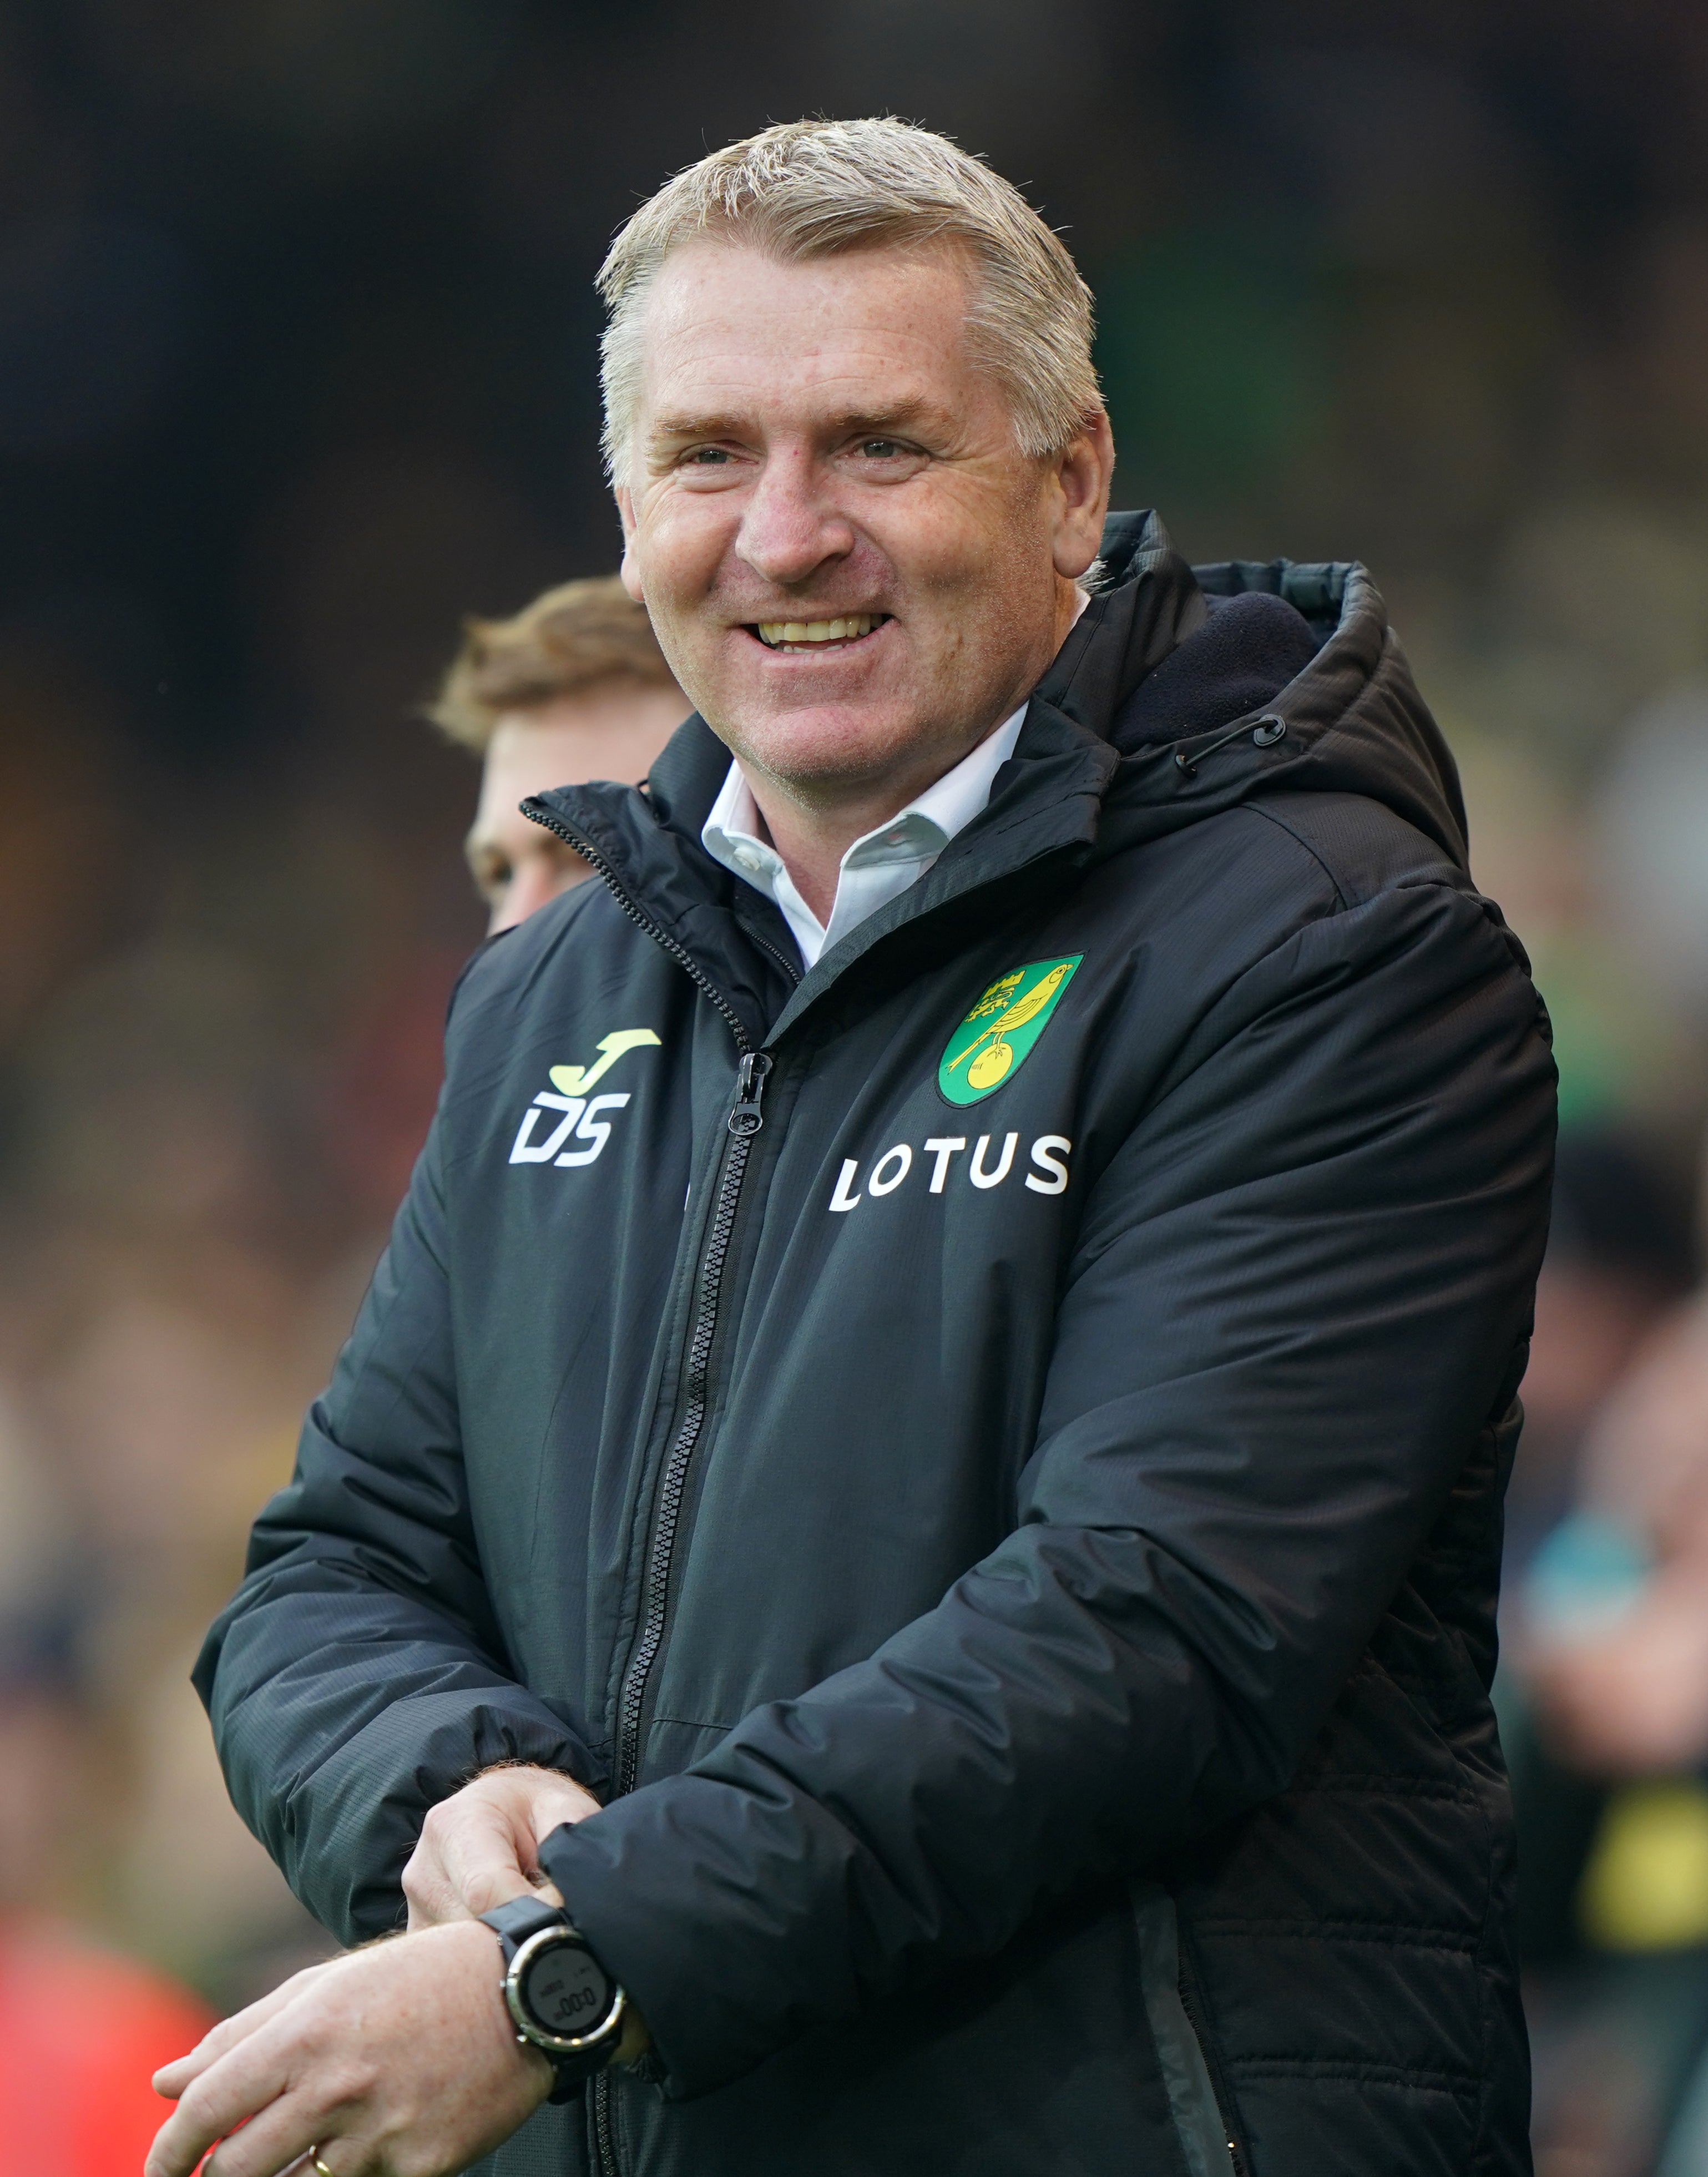 Norwich head coach Dean Smith intends to stay positive heading into the final two matches of a forgettable Premier League campaign (Joe Giddens/PA)